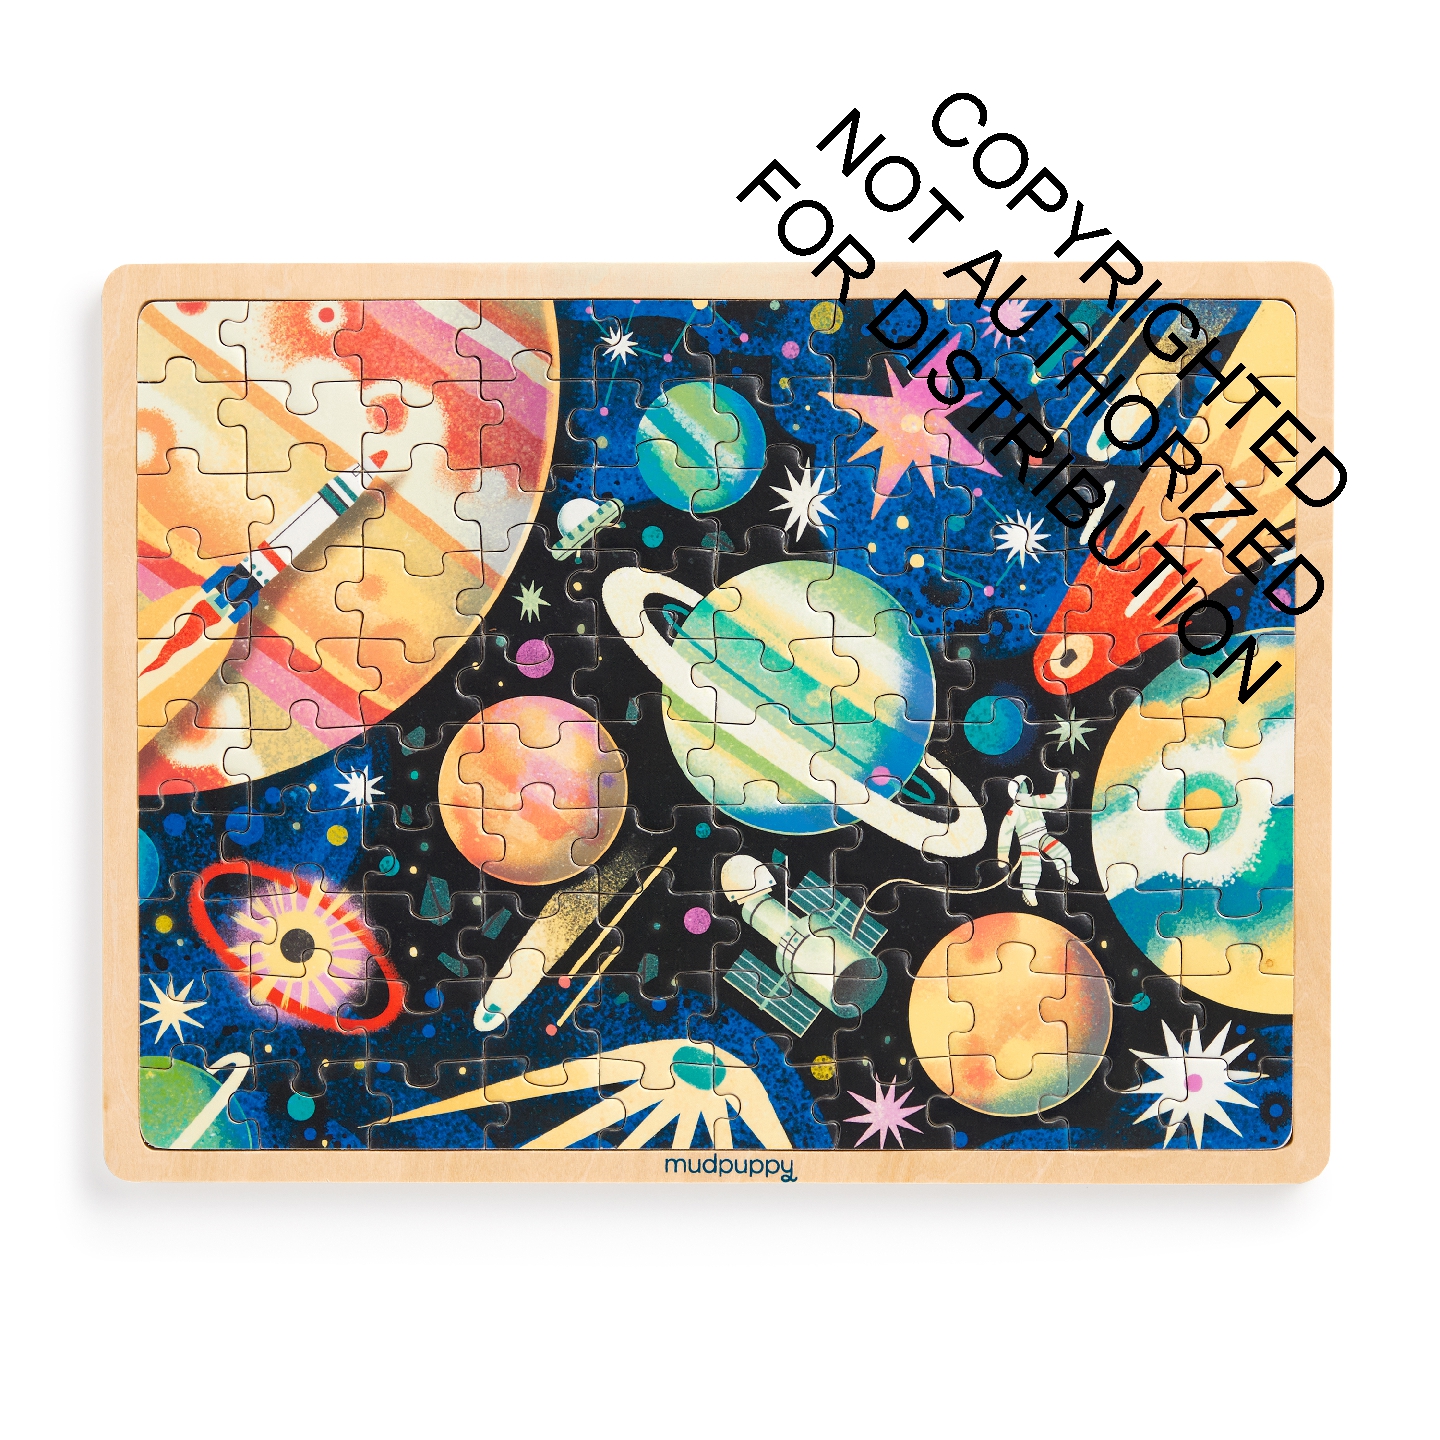 Space Mission 100 Piece Wood Puzzle + Display